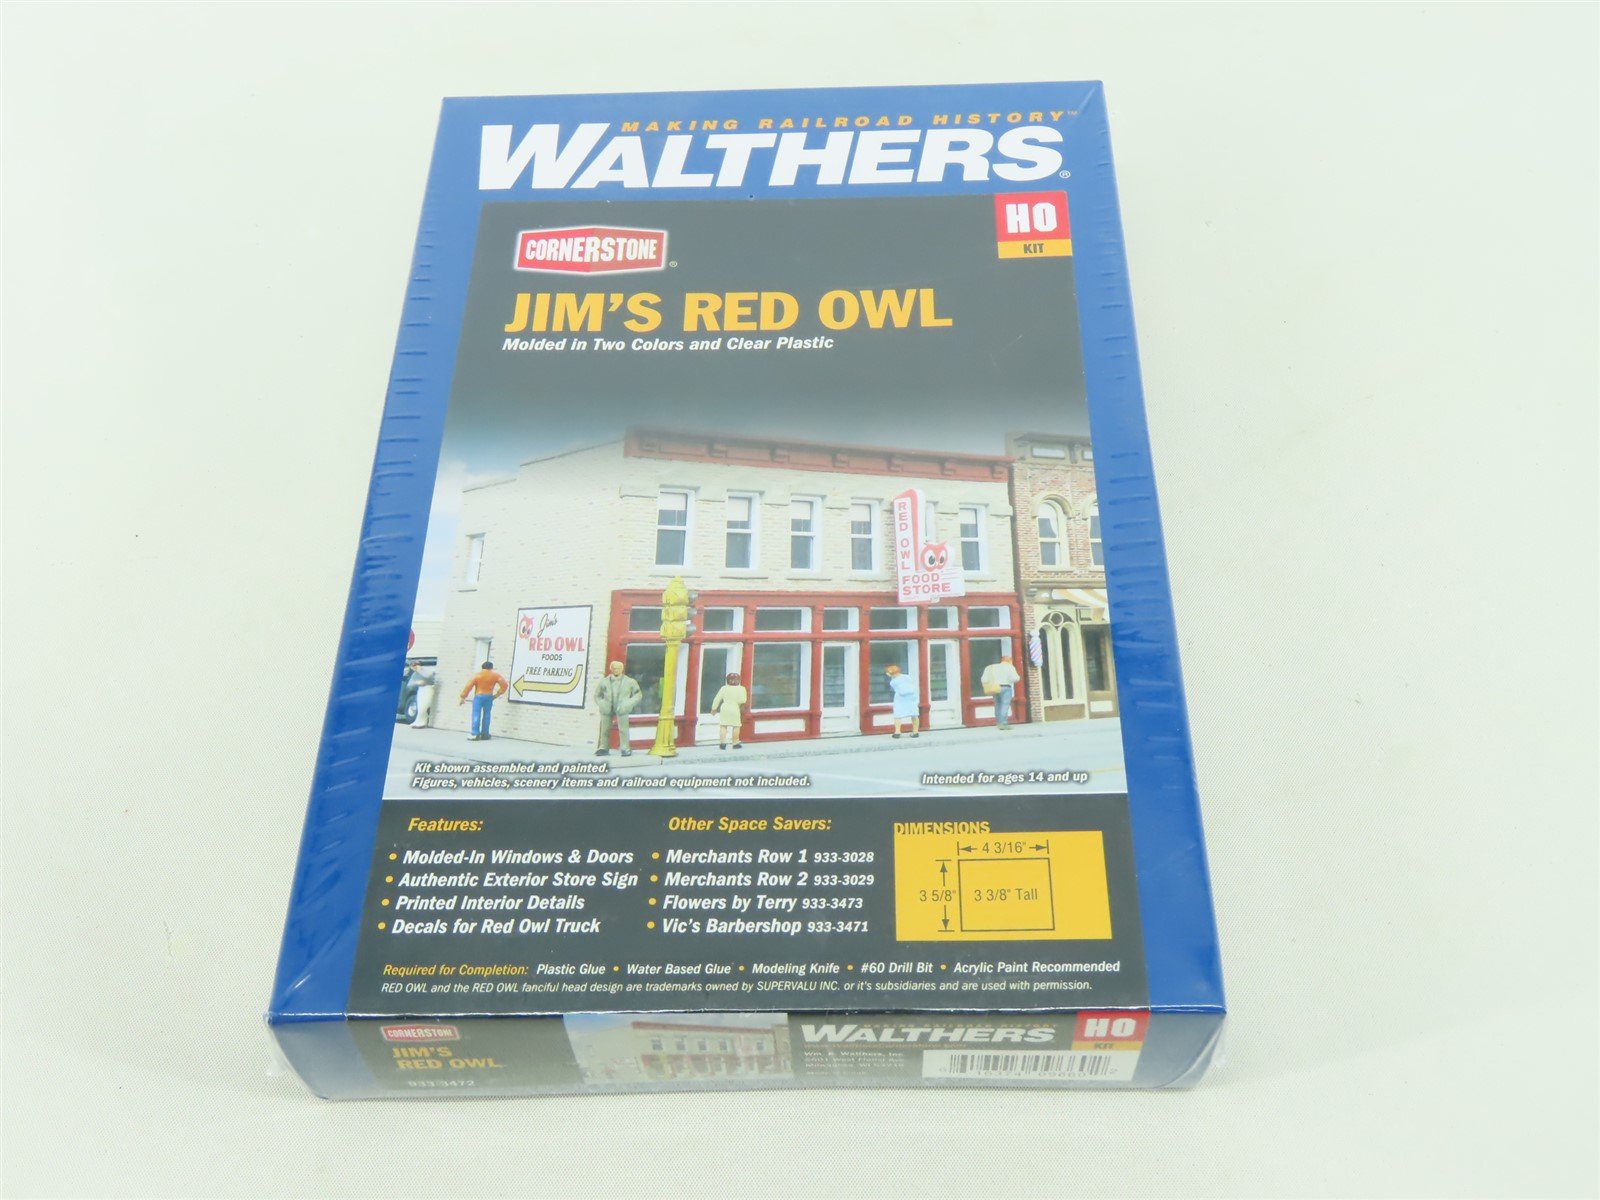 HO 1/87 Scale Walthers Cornerstone Kit #933-3472 Jim's Red Owl - Sealed